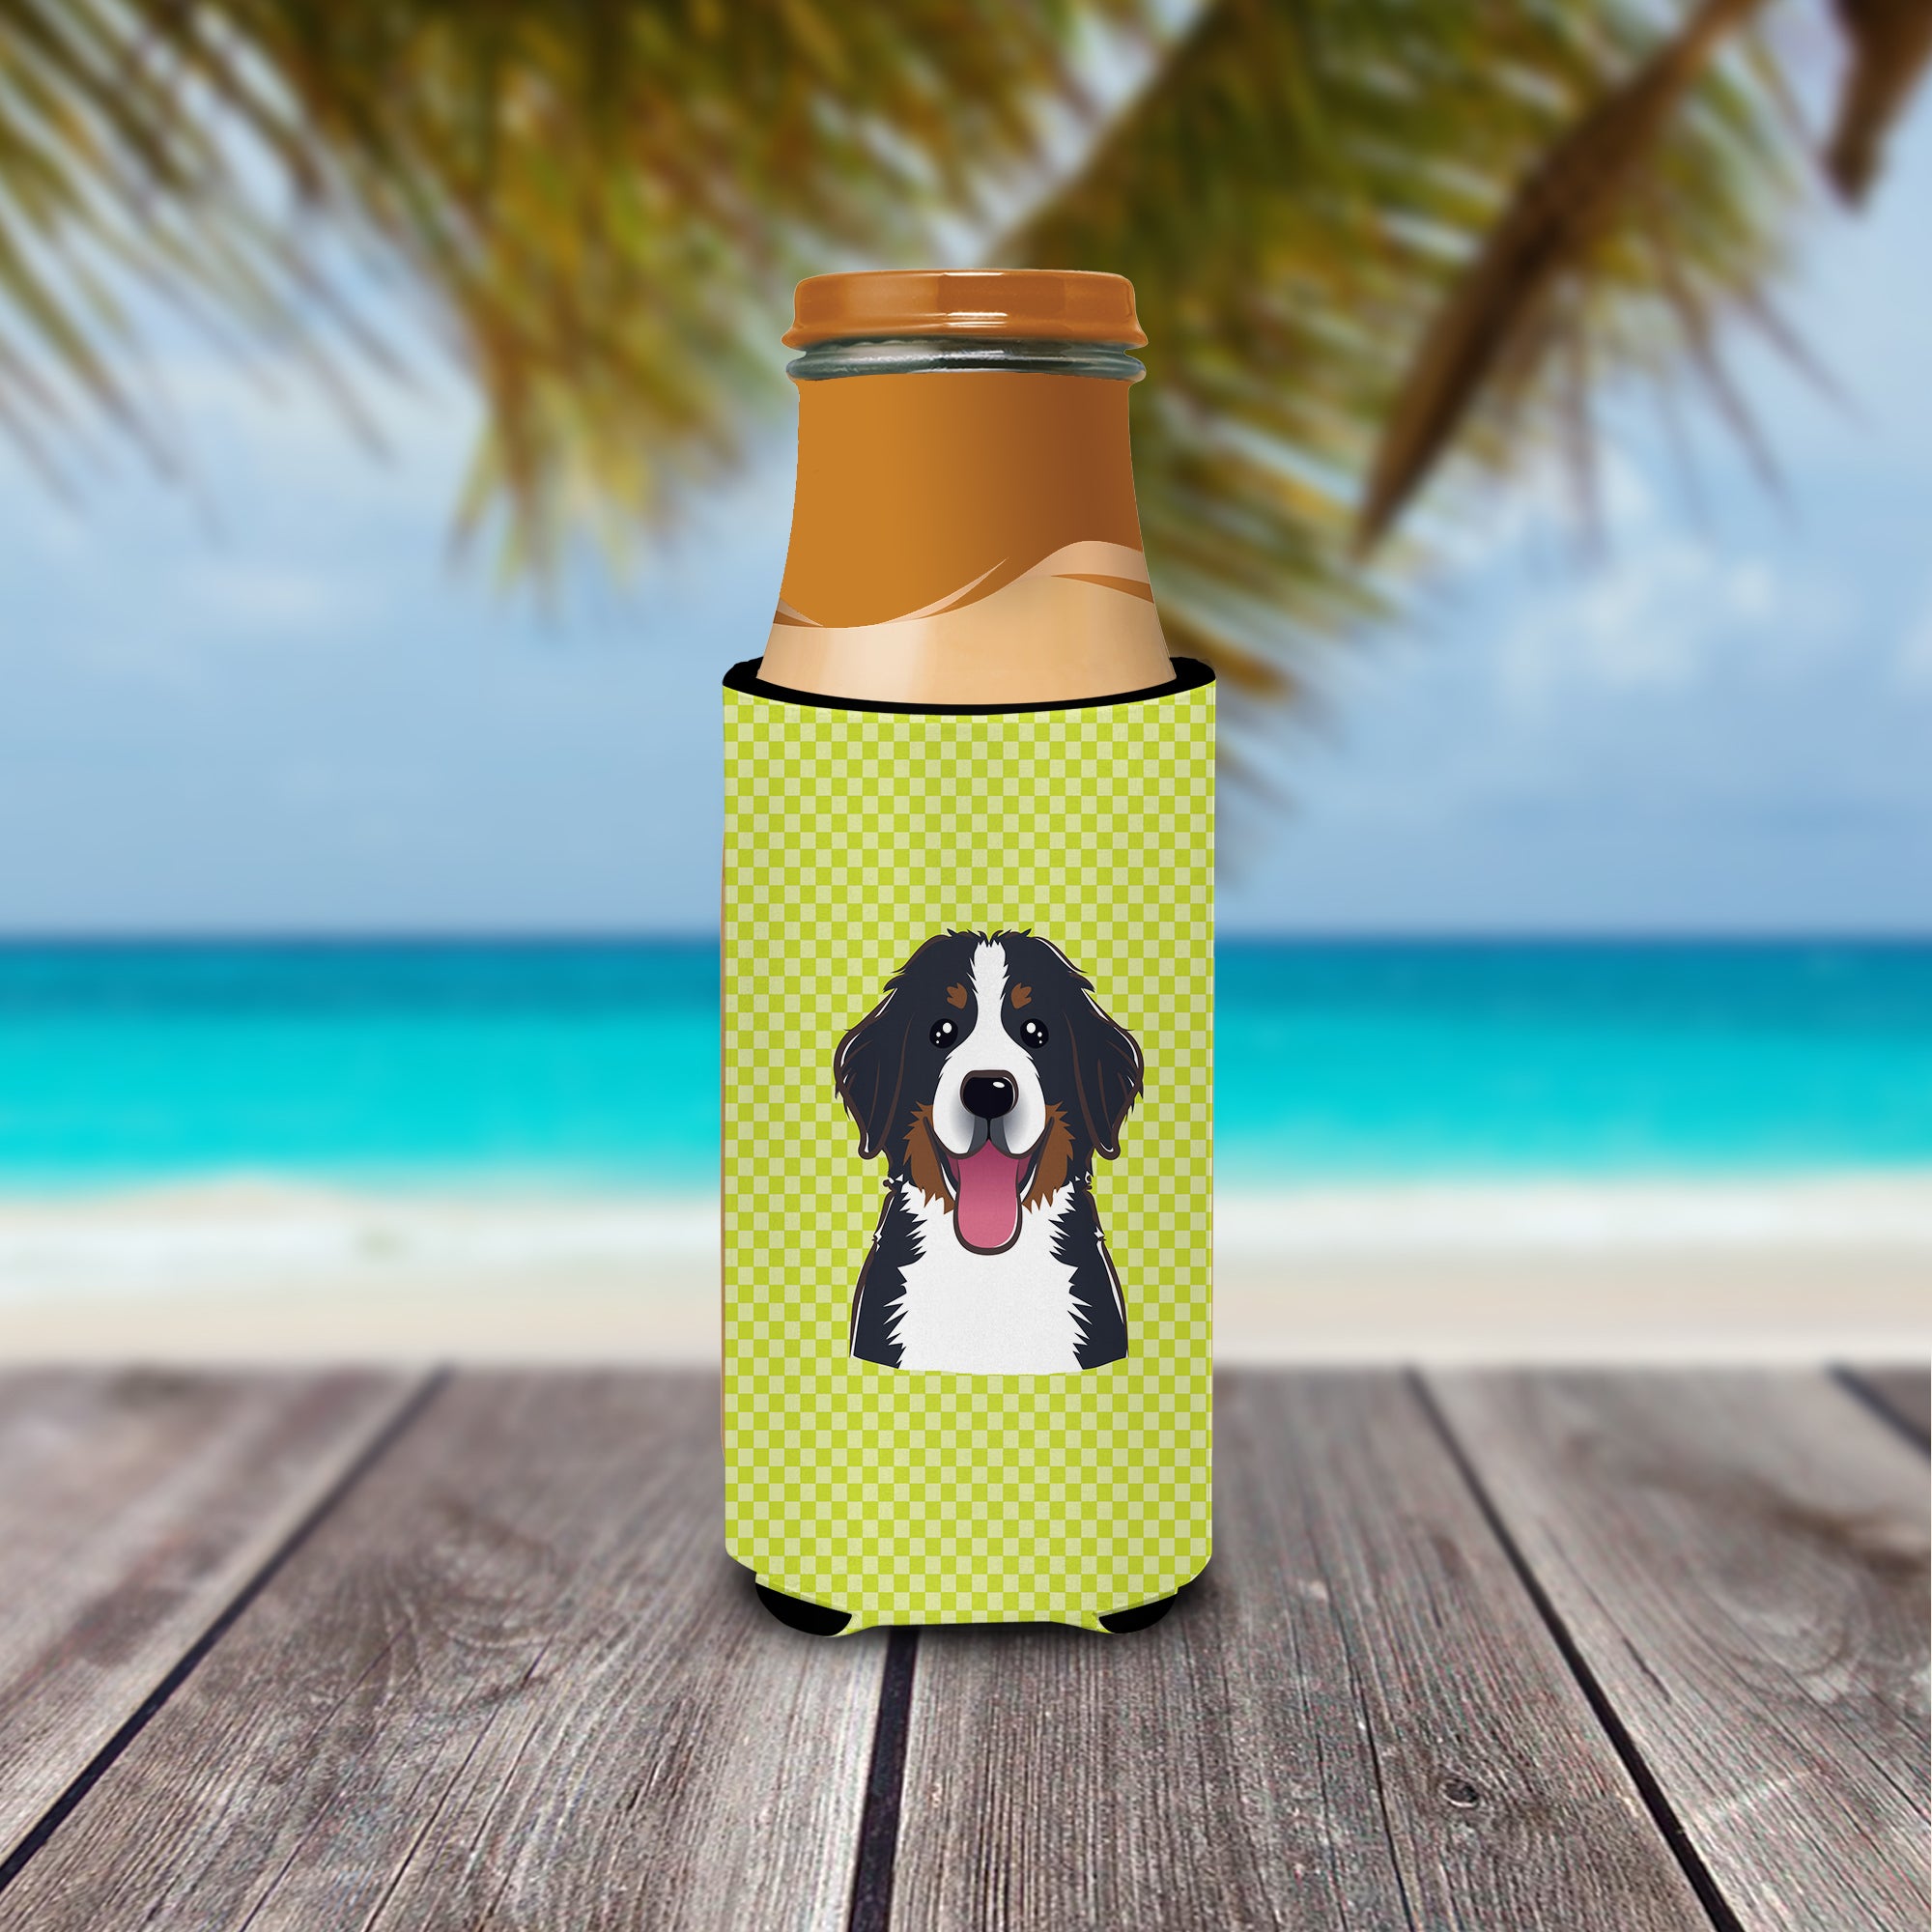 Checkerboard Lime Green Bernese Mountain Dog Ultra Beverage Insulators slim cans.